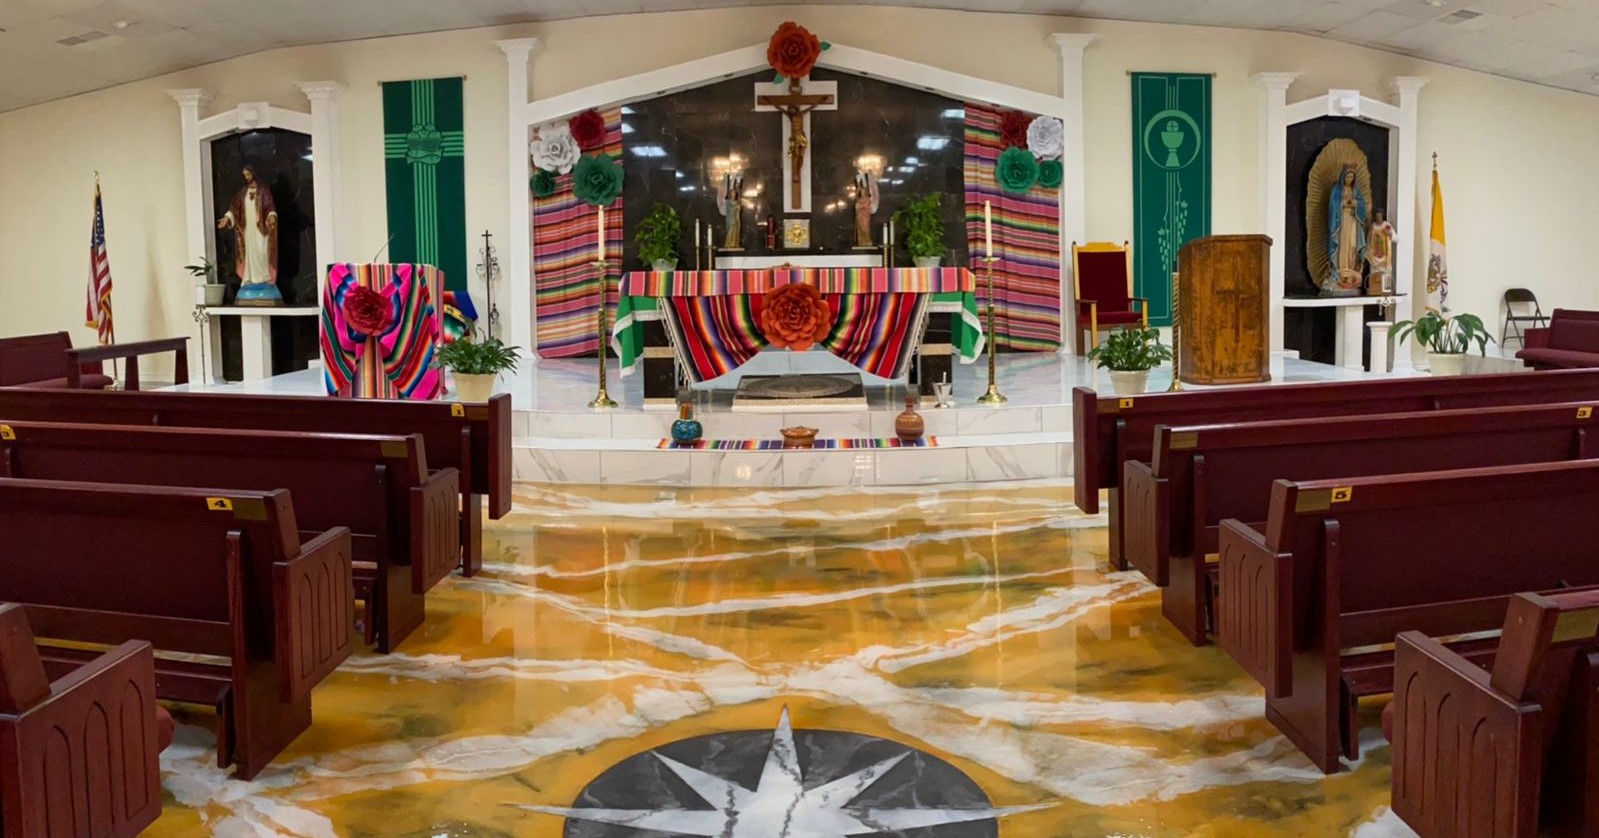 Our Lady of Guadalupe, Diboll, TX